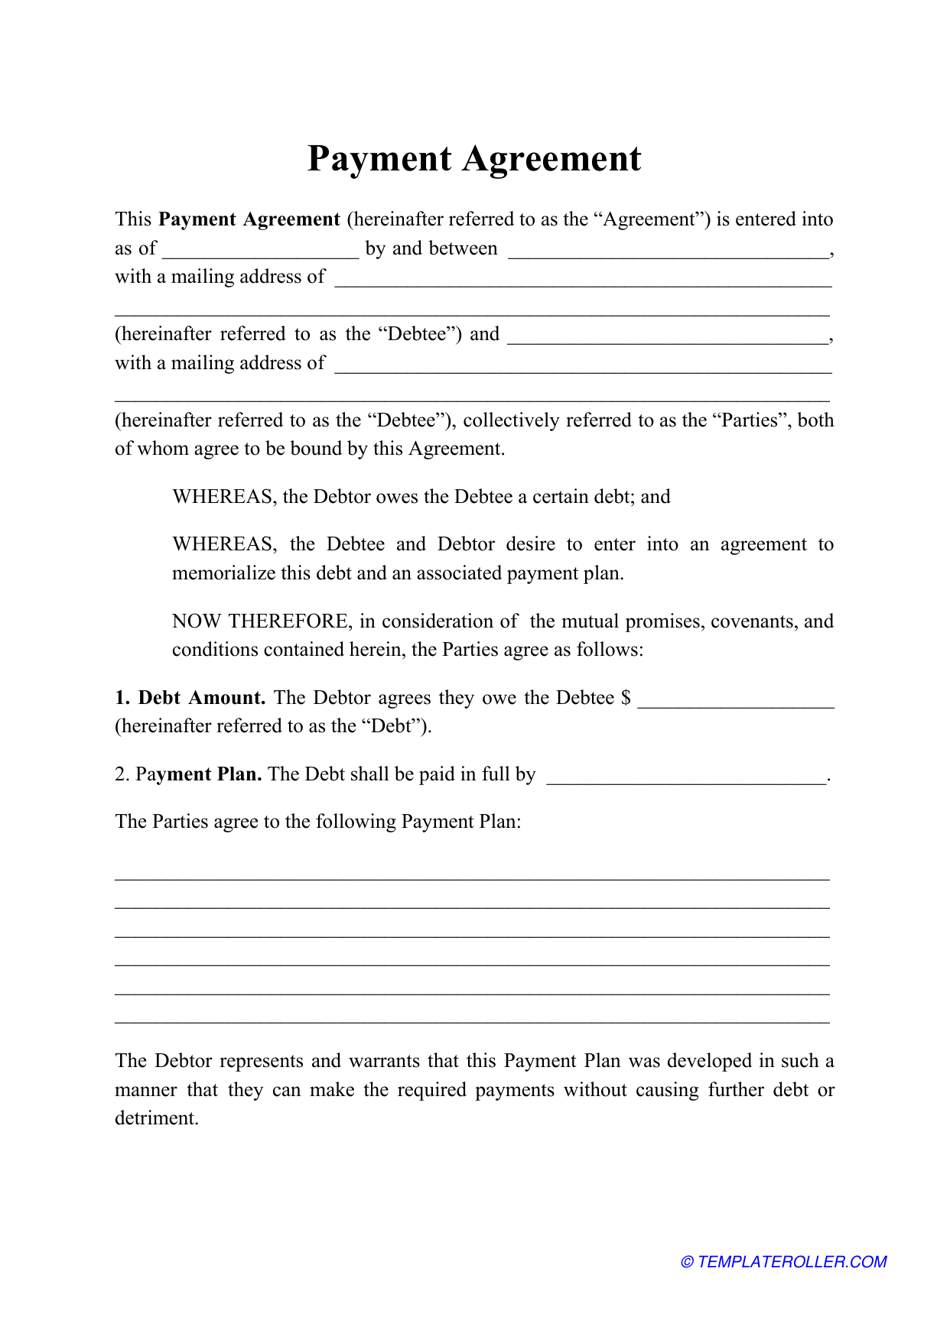 Payment Agreement Template Download Printable PDF  Templateroller Throughout free installment loan agreement template